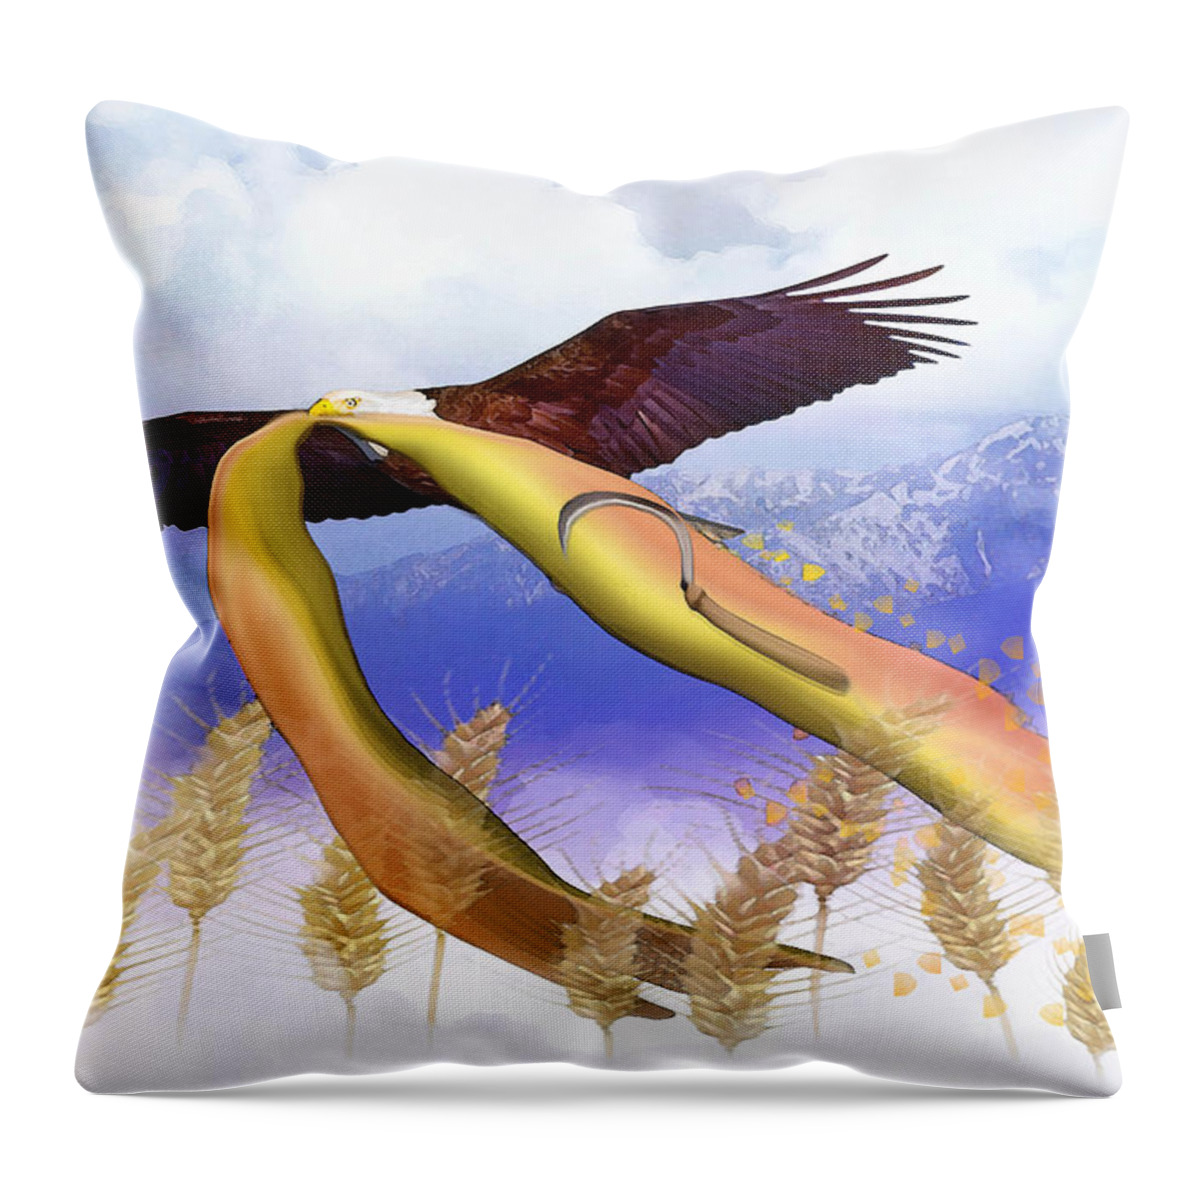 Prophetic Harvester Throw Pillow featuring the digital art Prophetic Harvester by Jennifer Page